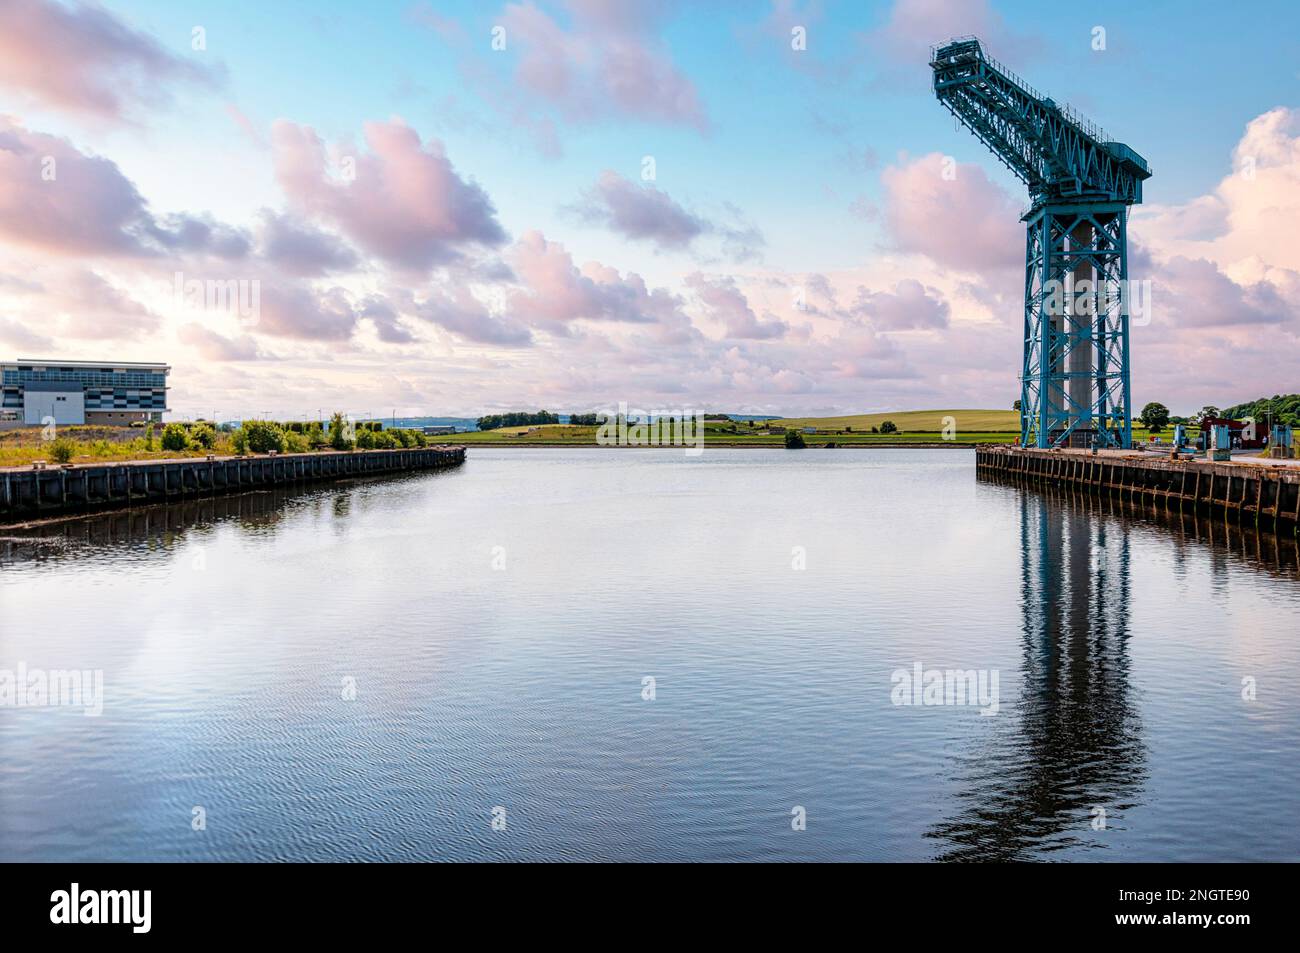 The Titan crane is the last remaining evidence of the John Brown's Shipyard on the Clyde riverside at Clydebank. Stock Photo